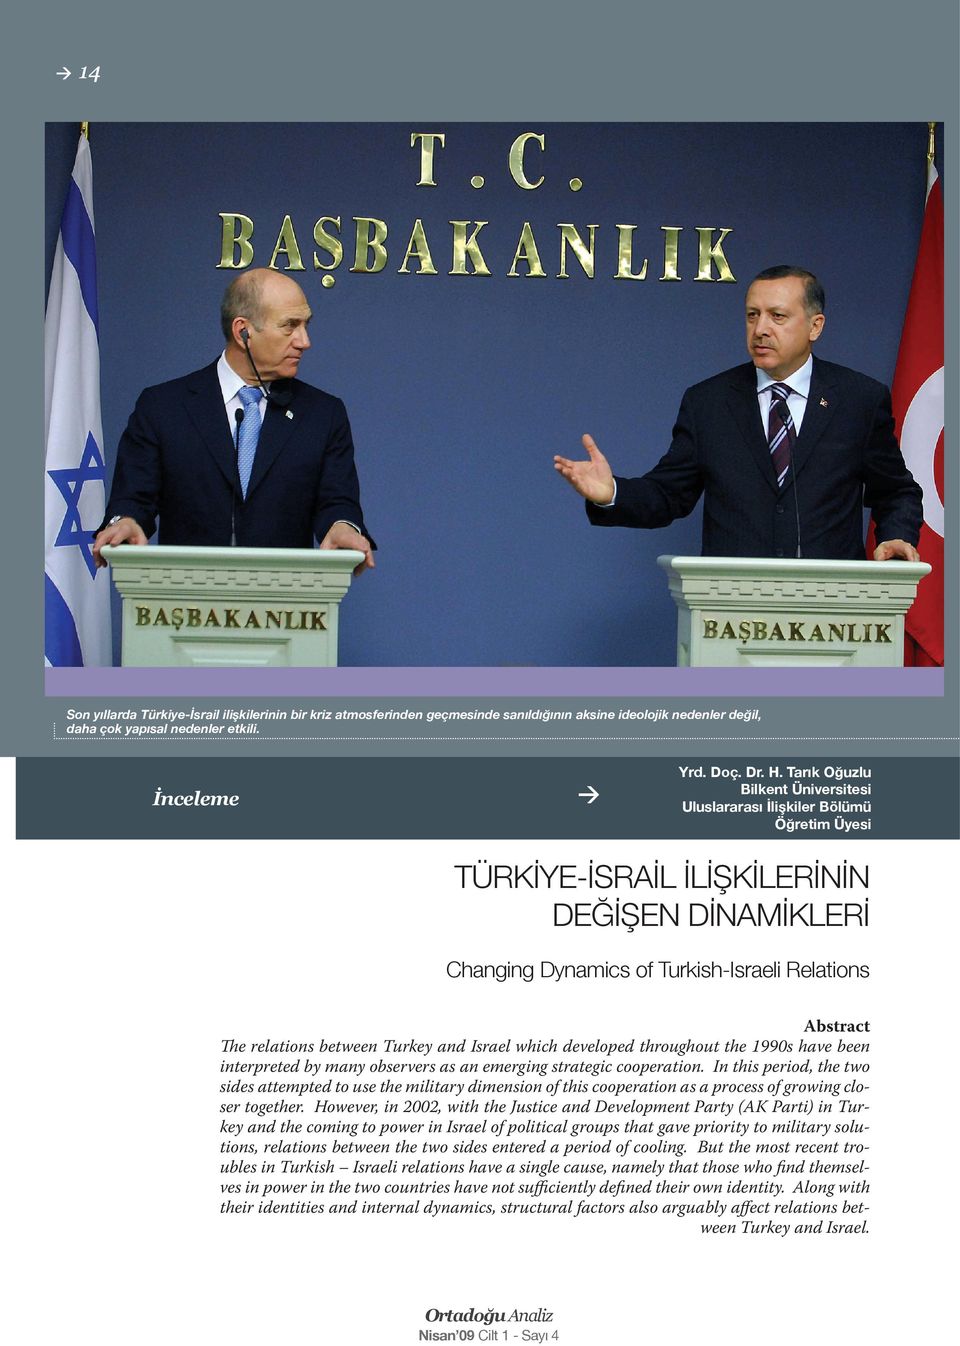 between Turkey and Israel which developed throughout the 1990s have been interpreted by many observers as an emerging strategic cooperation.